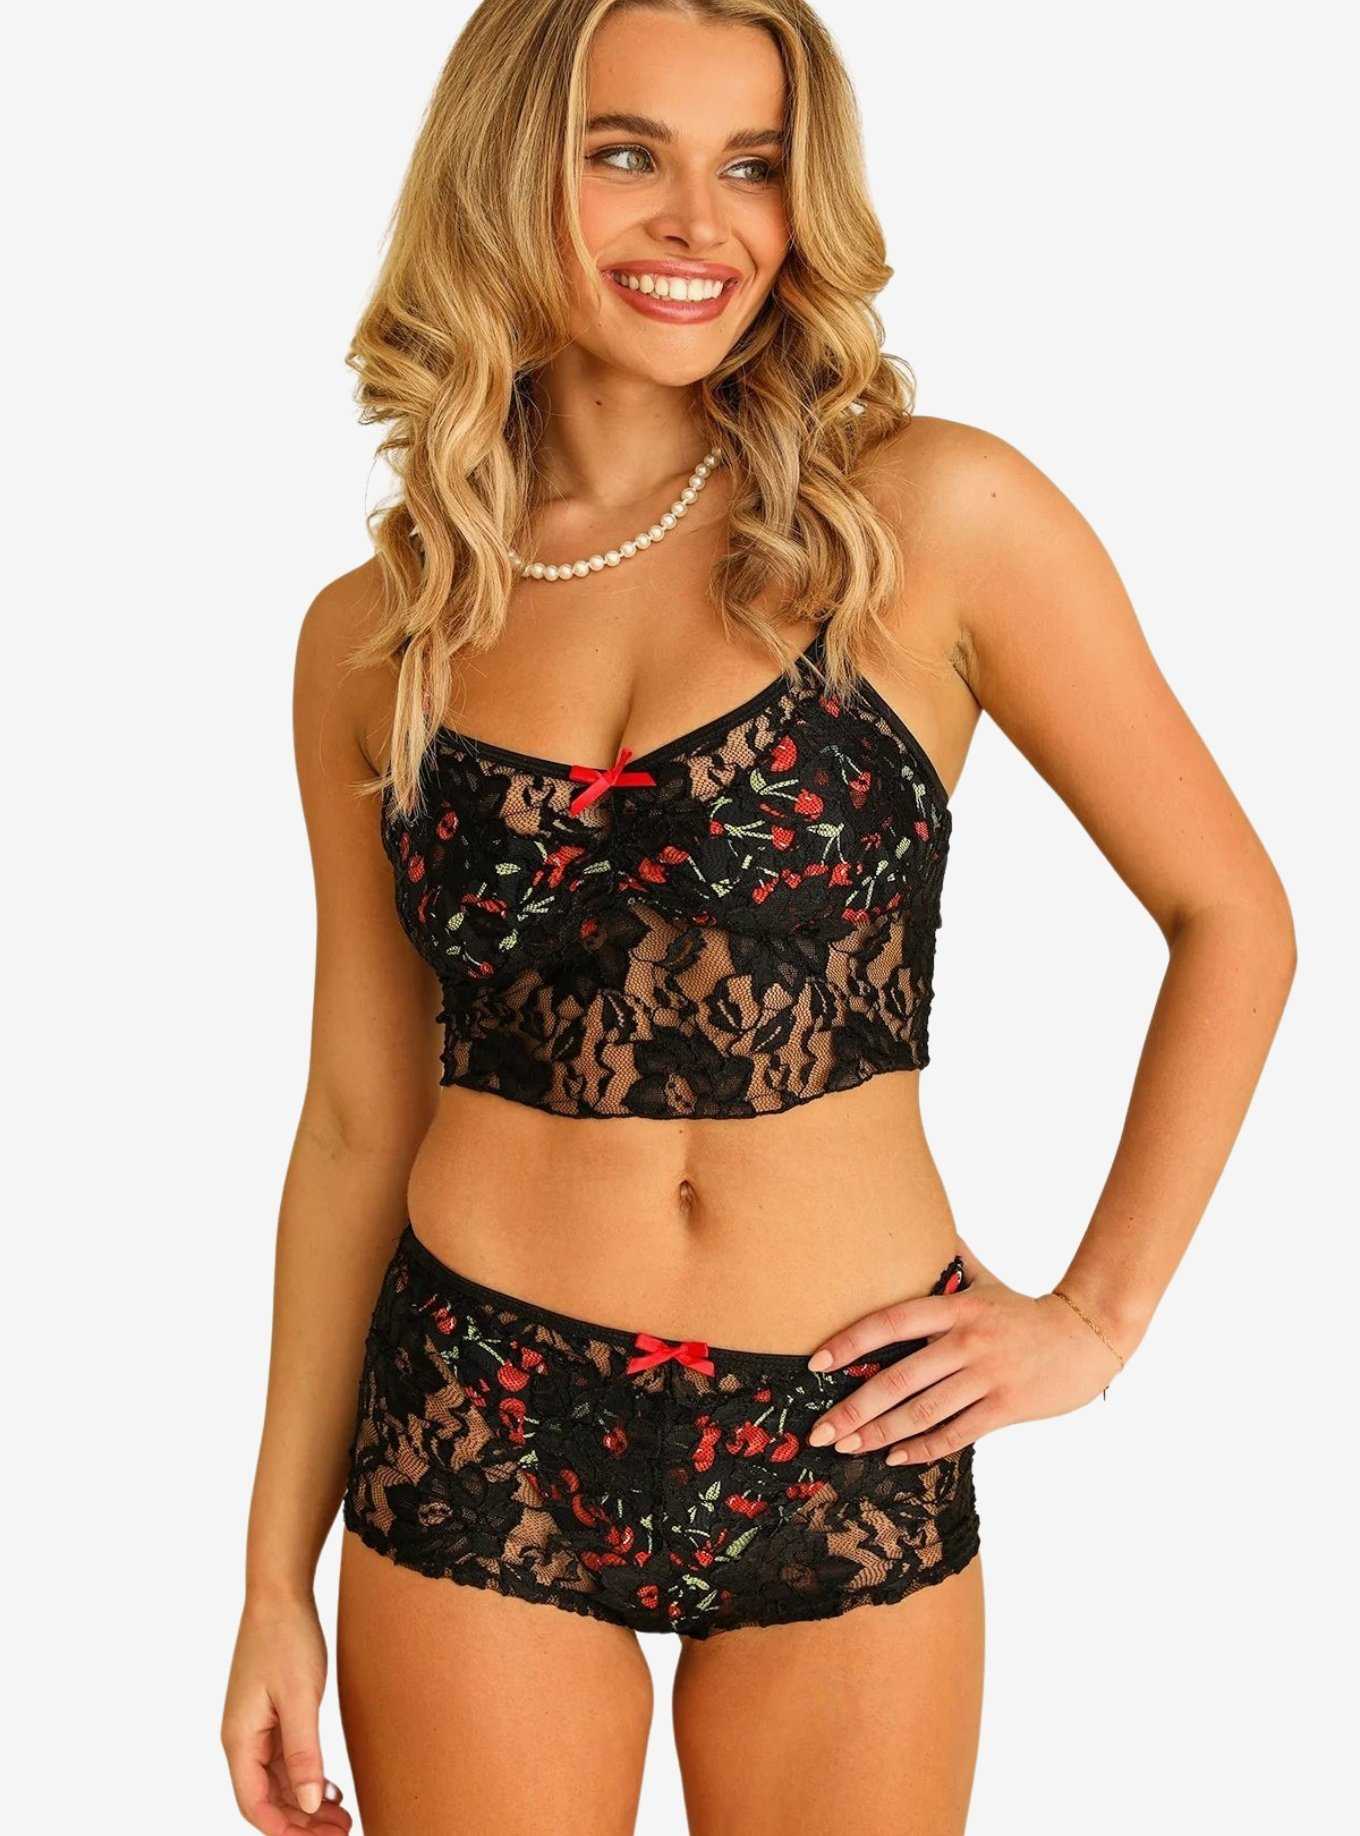 Dippin' Daisy's Campbell See Through Lace Cover-Up Shorts Black, , hi-res